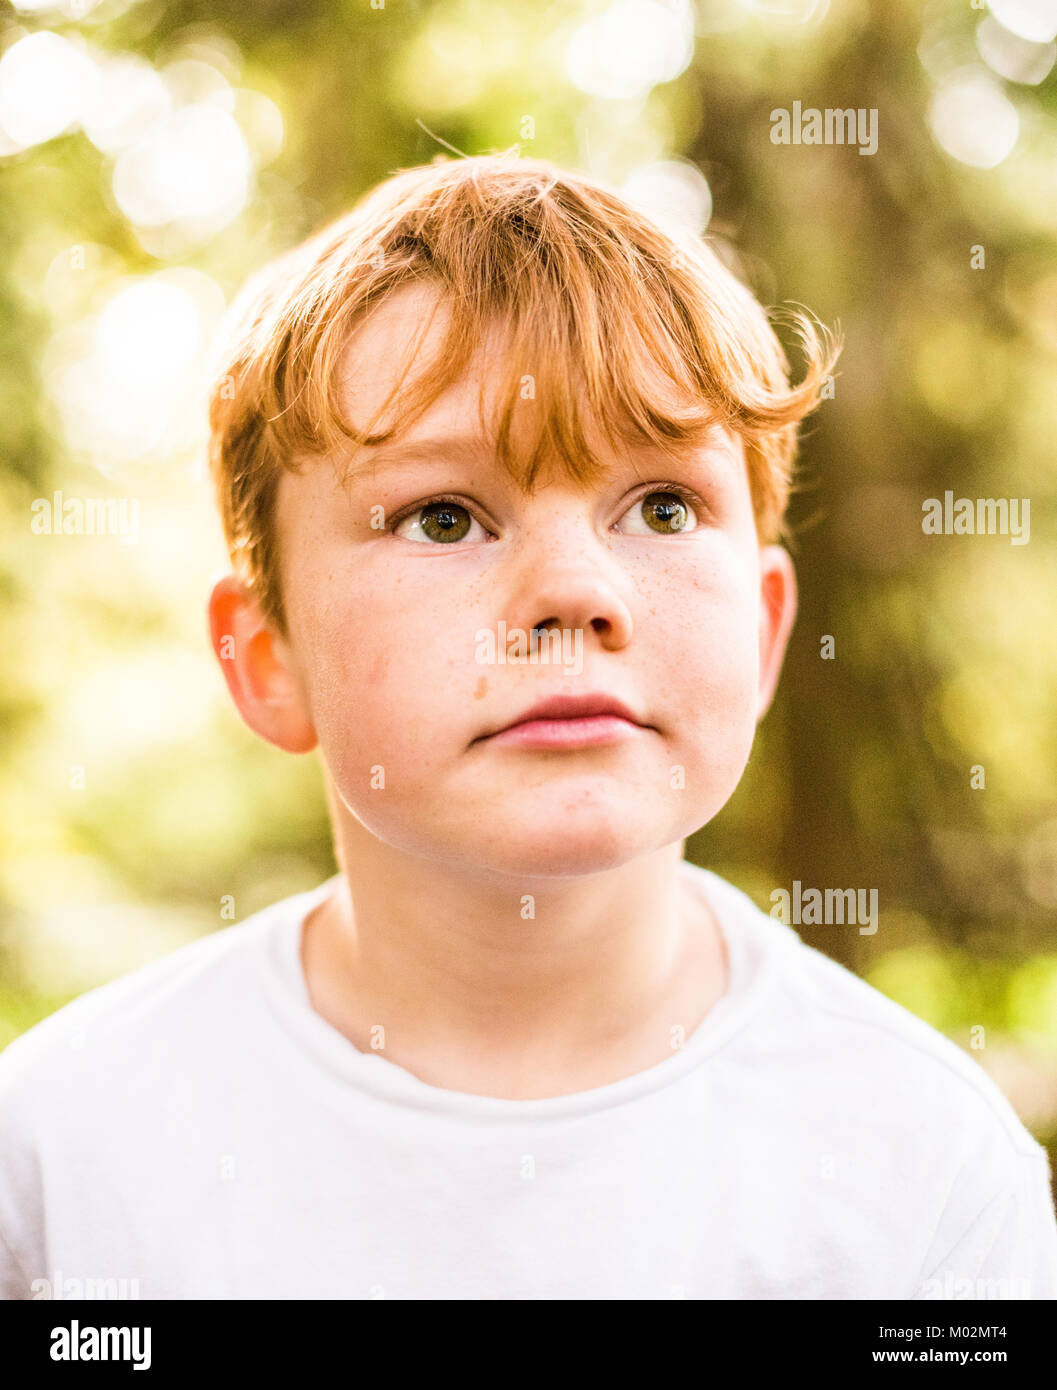 A youg red haired boy looking away from camera Stock Photo